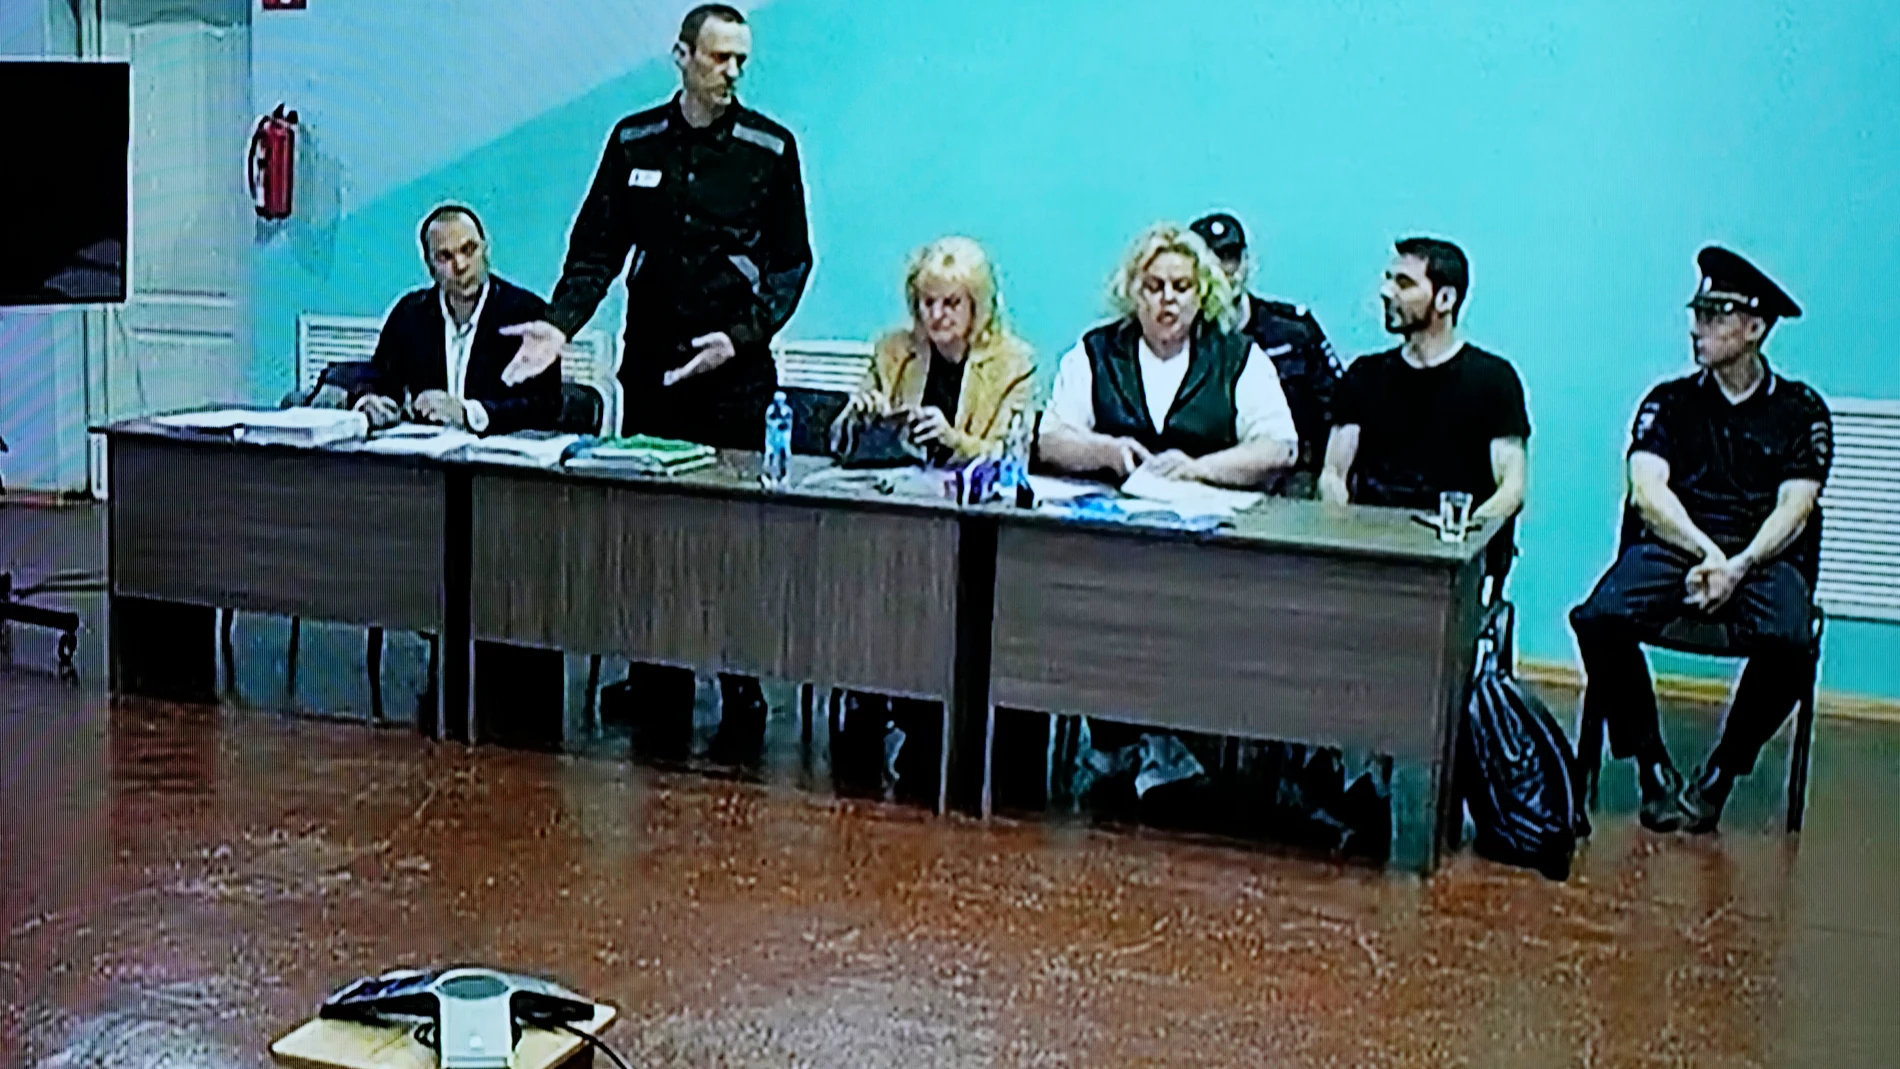 A vies of a TV Screen showing Russian opposition leader Alexei Navalny, 2nd left sitting between his lawyers in a courtroom, via video link provided by the Russian Federal Penitentiary Service, during a preliminary hearing, in Melekhovo, Vladimir region, about 260 kilometers (163 miles) northeast of Moscow, Russia, on Monday, June 19, 2023. A Russian court has opened a new trial of imprisoned Russian opposition leader Alexei Navalny that could keep him behind bars for decades. (AP Photo/Alexa...